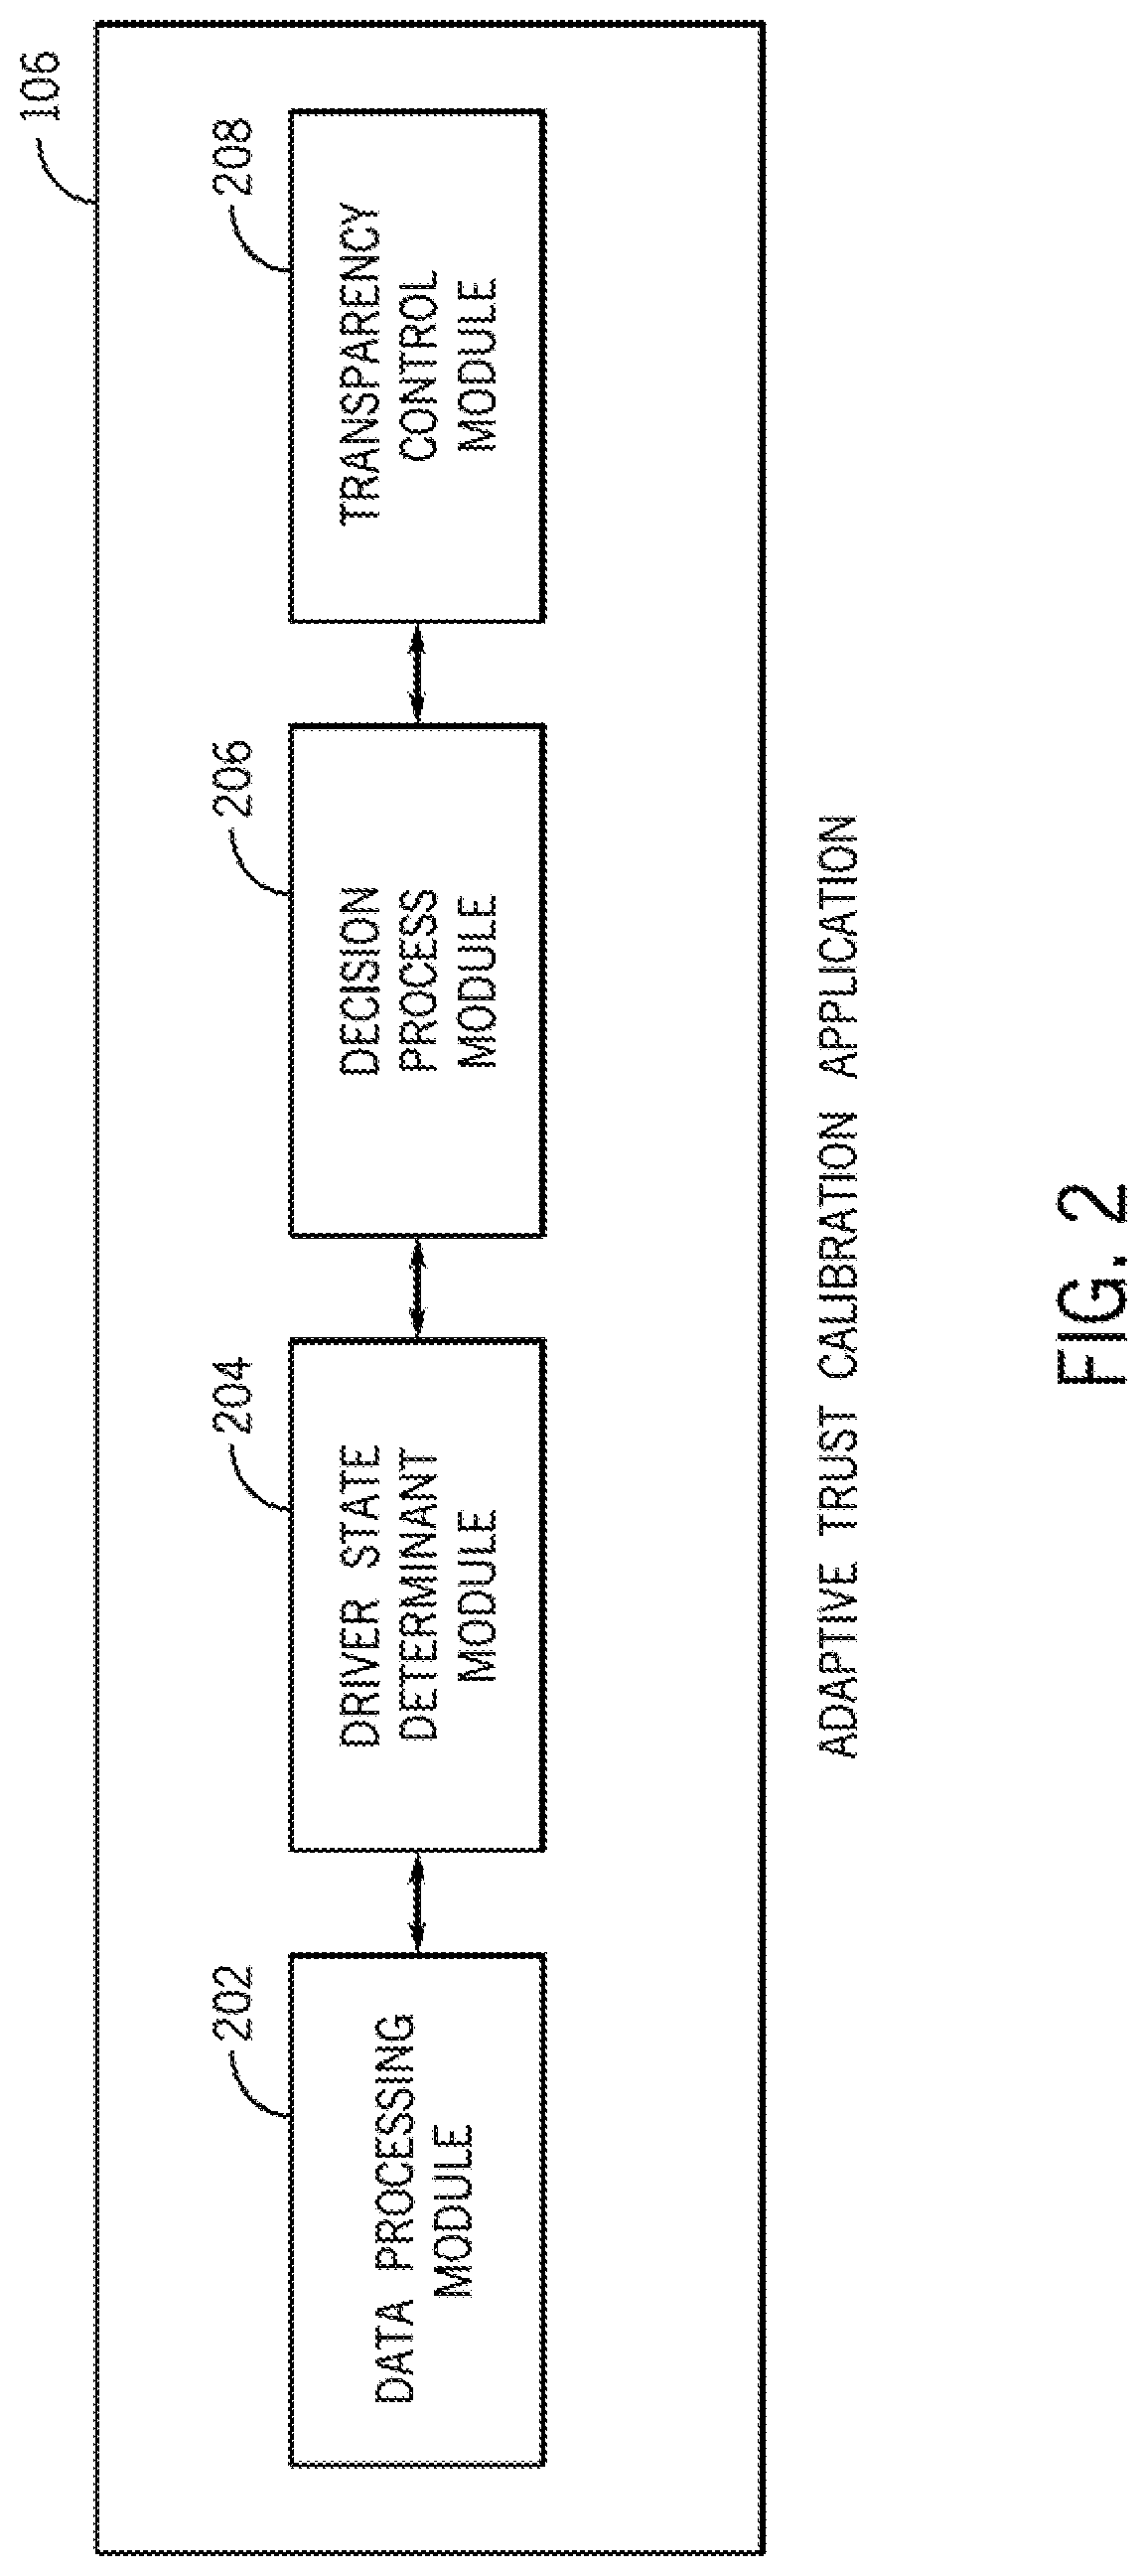 System and method for providing adaptive trust calibration in driving automation